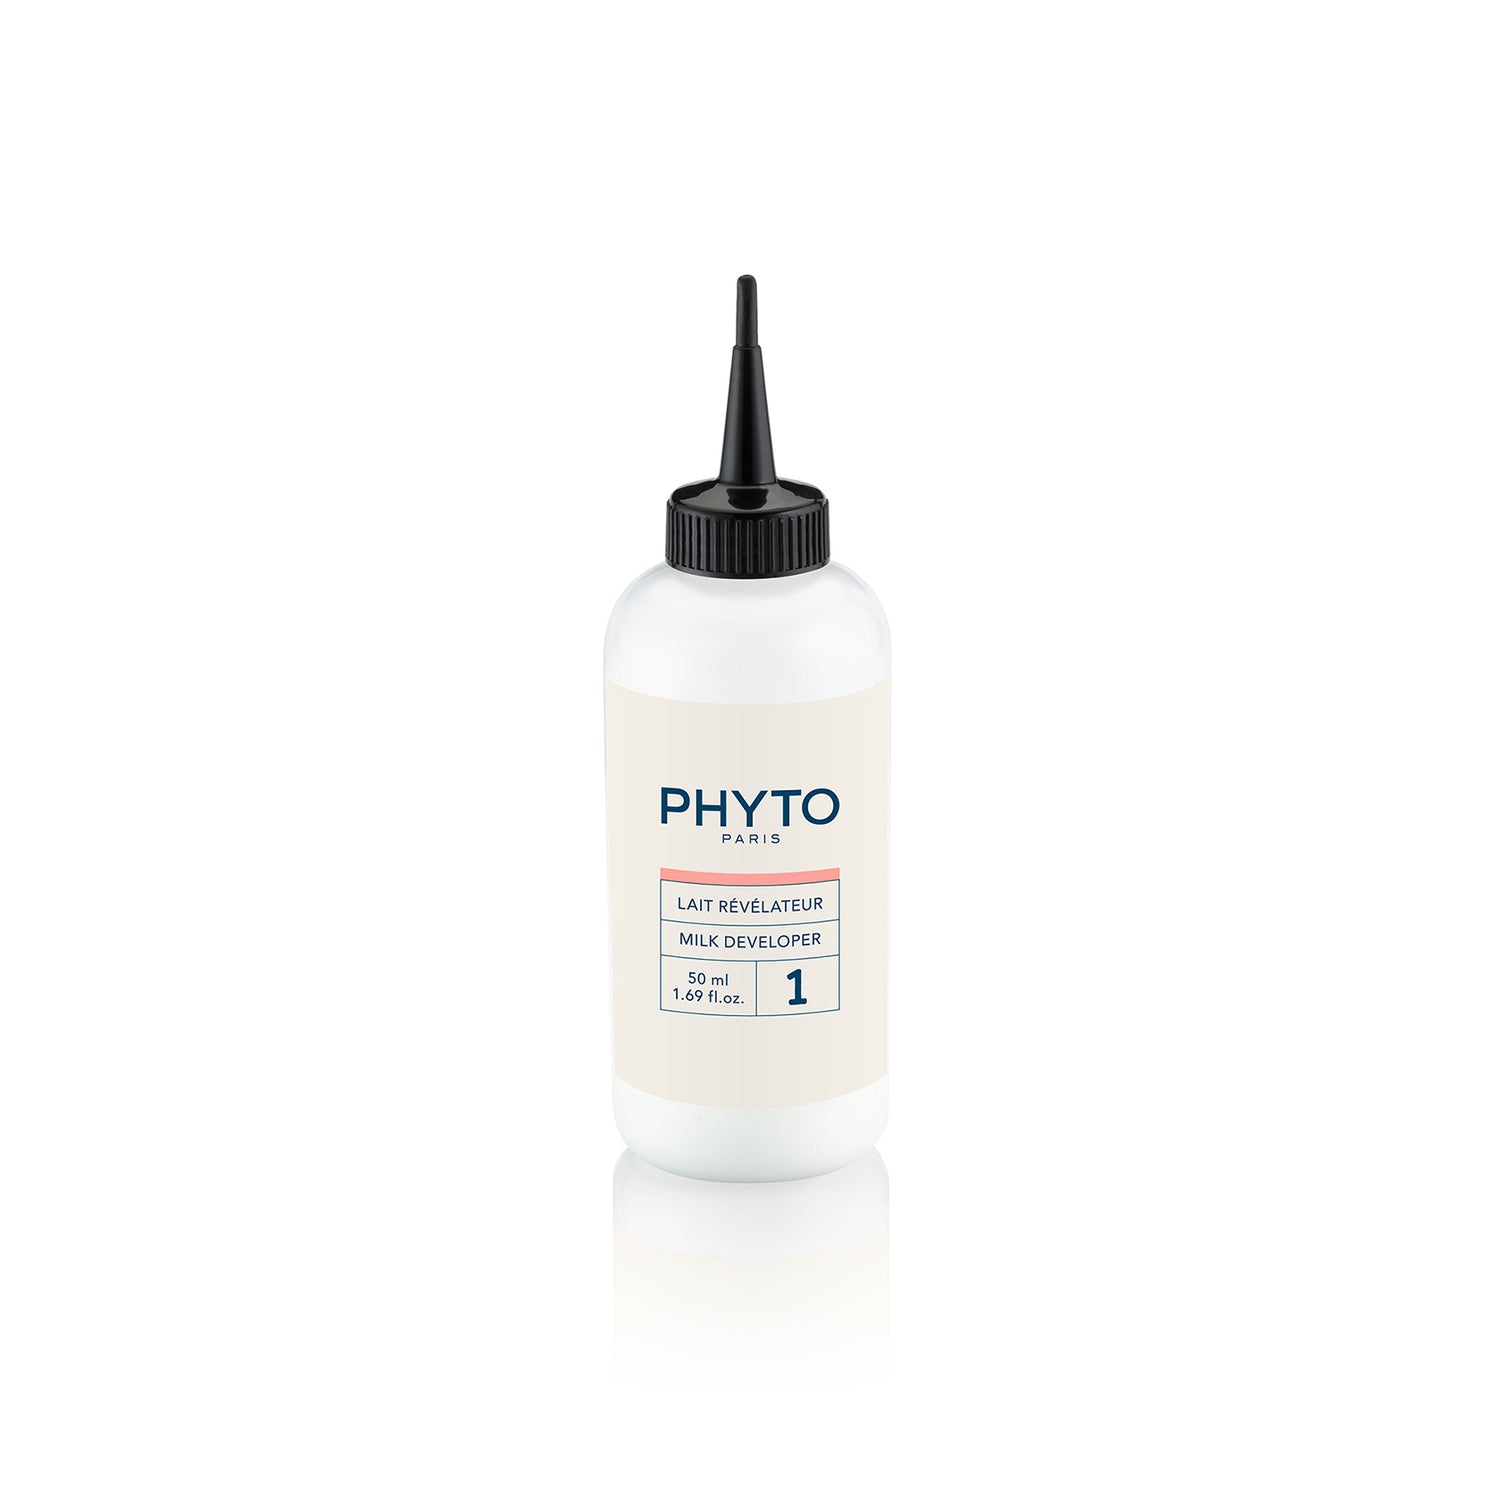 Phytocolor Permanent Color Shade 8.1 Light Ash Blonde